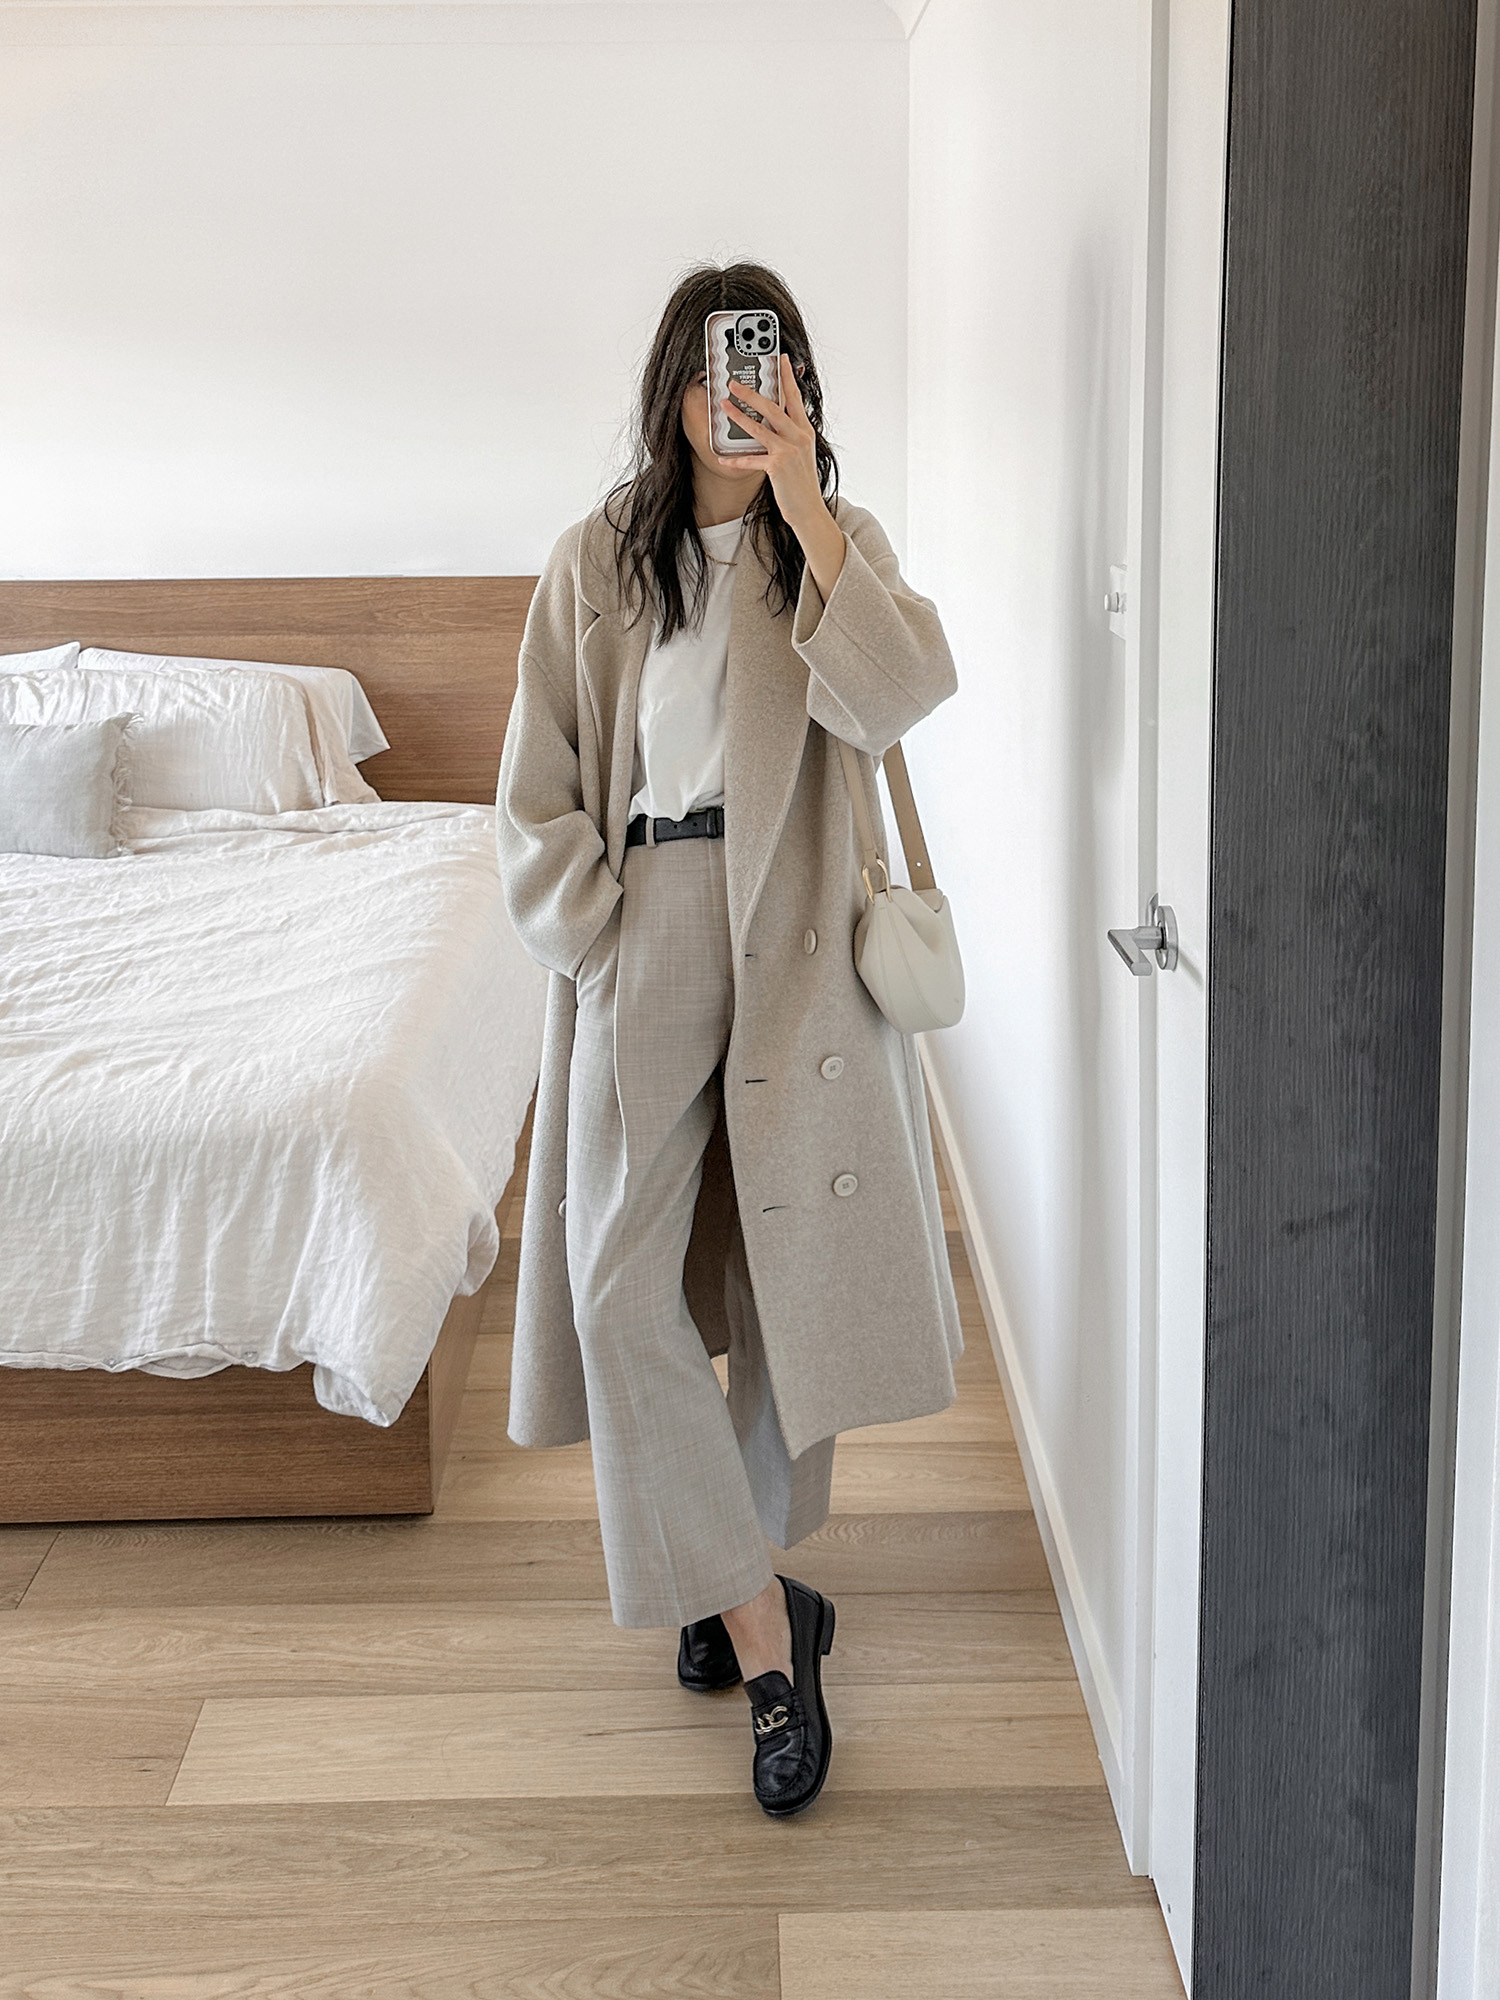 Parisian chic neutral outfit with loafers